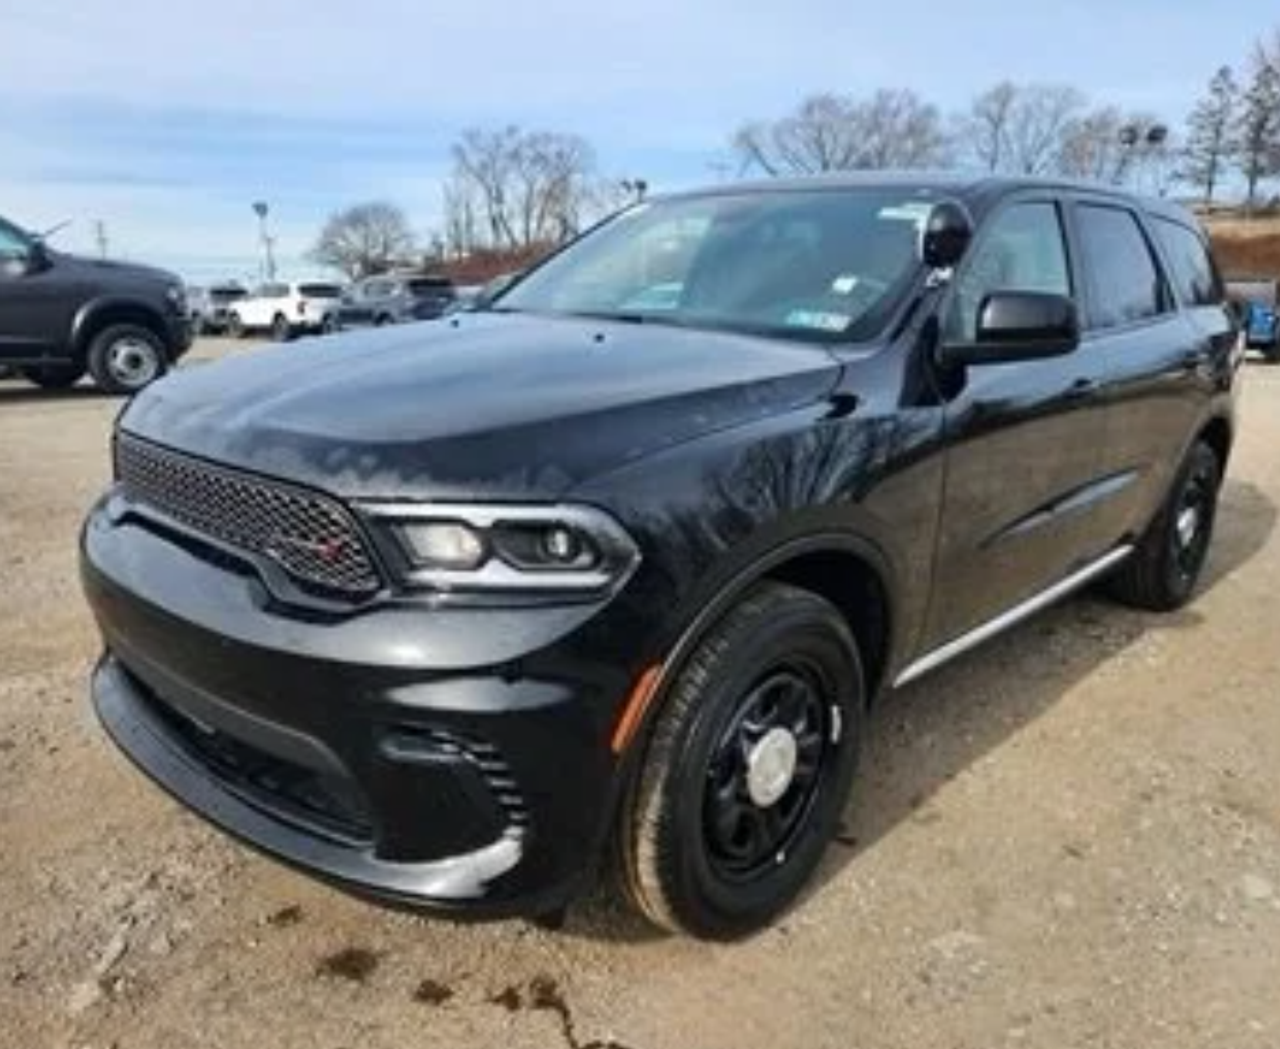 New 2023 Black Dodge Durango PPV V6 Police Package SUV AWD, ready to be built as a Marked Patrol Package (Emergency Lighting, Siren, Controller,  Console, Partition, etc.), + Delivery, DURMP6B2